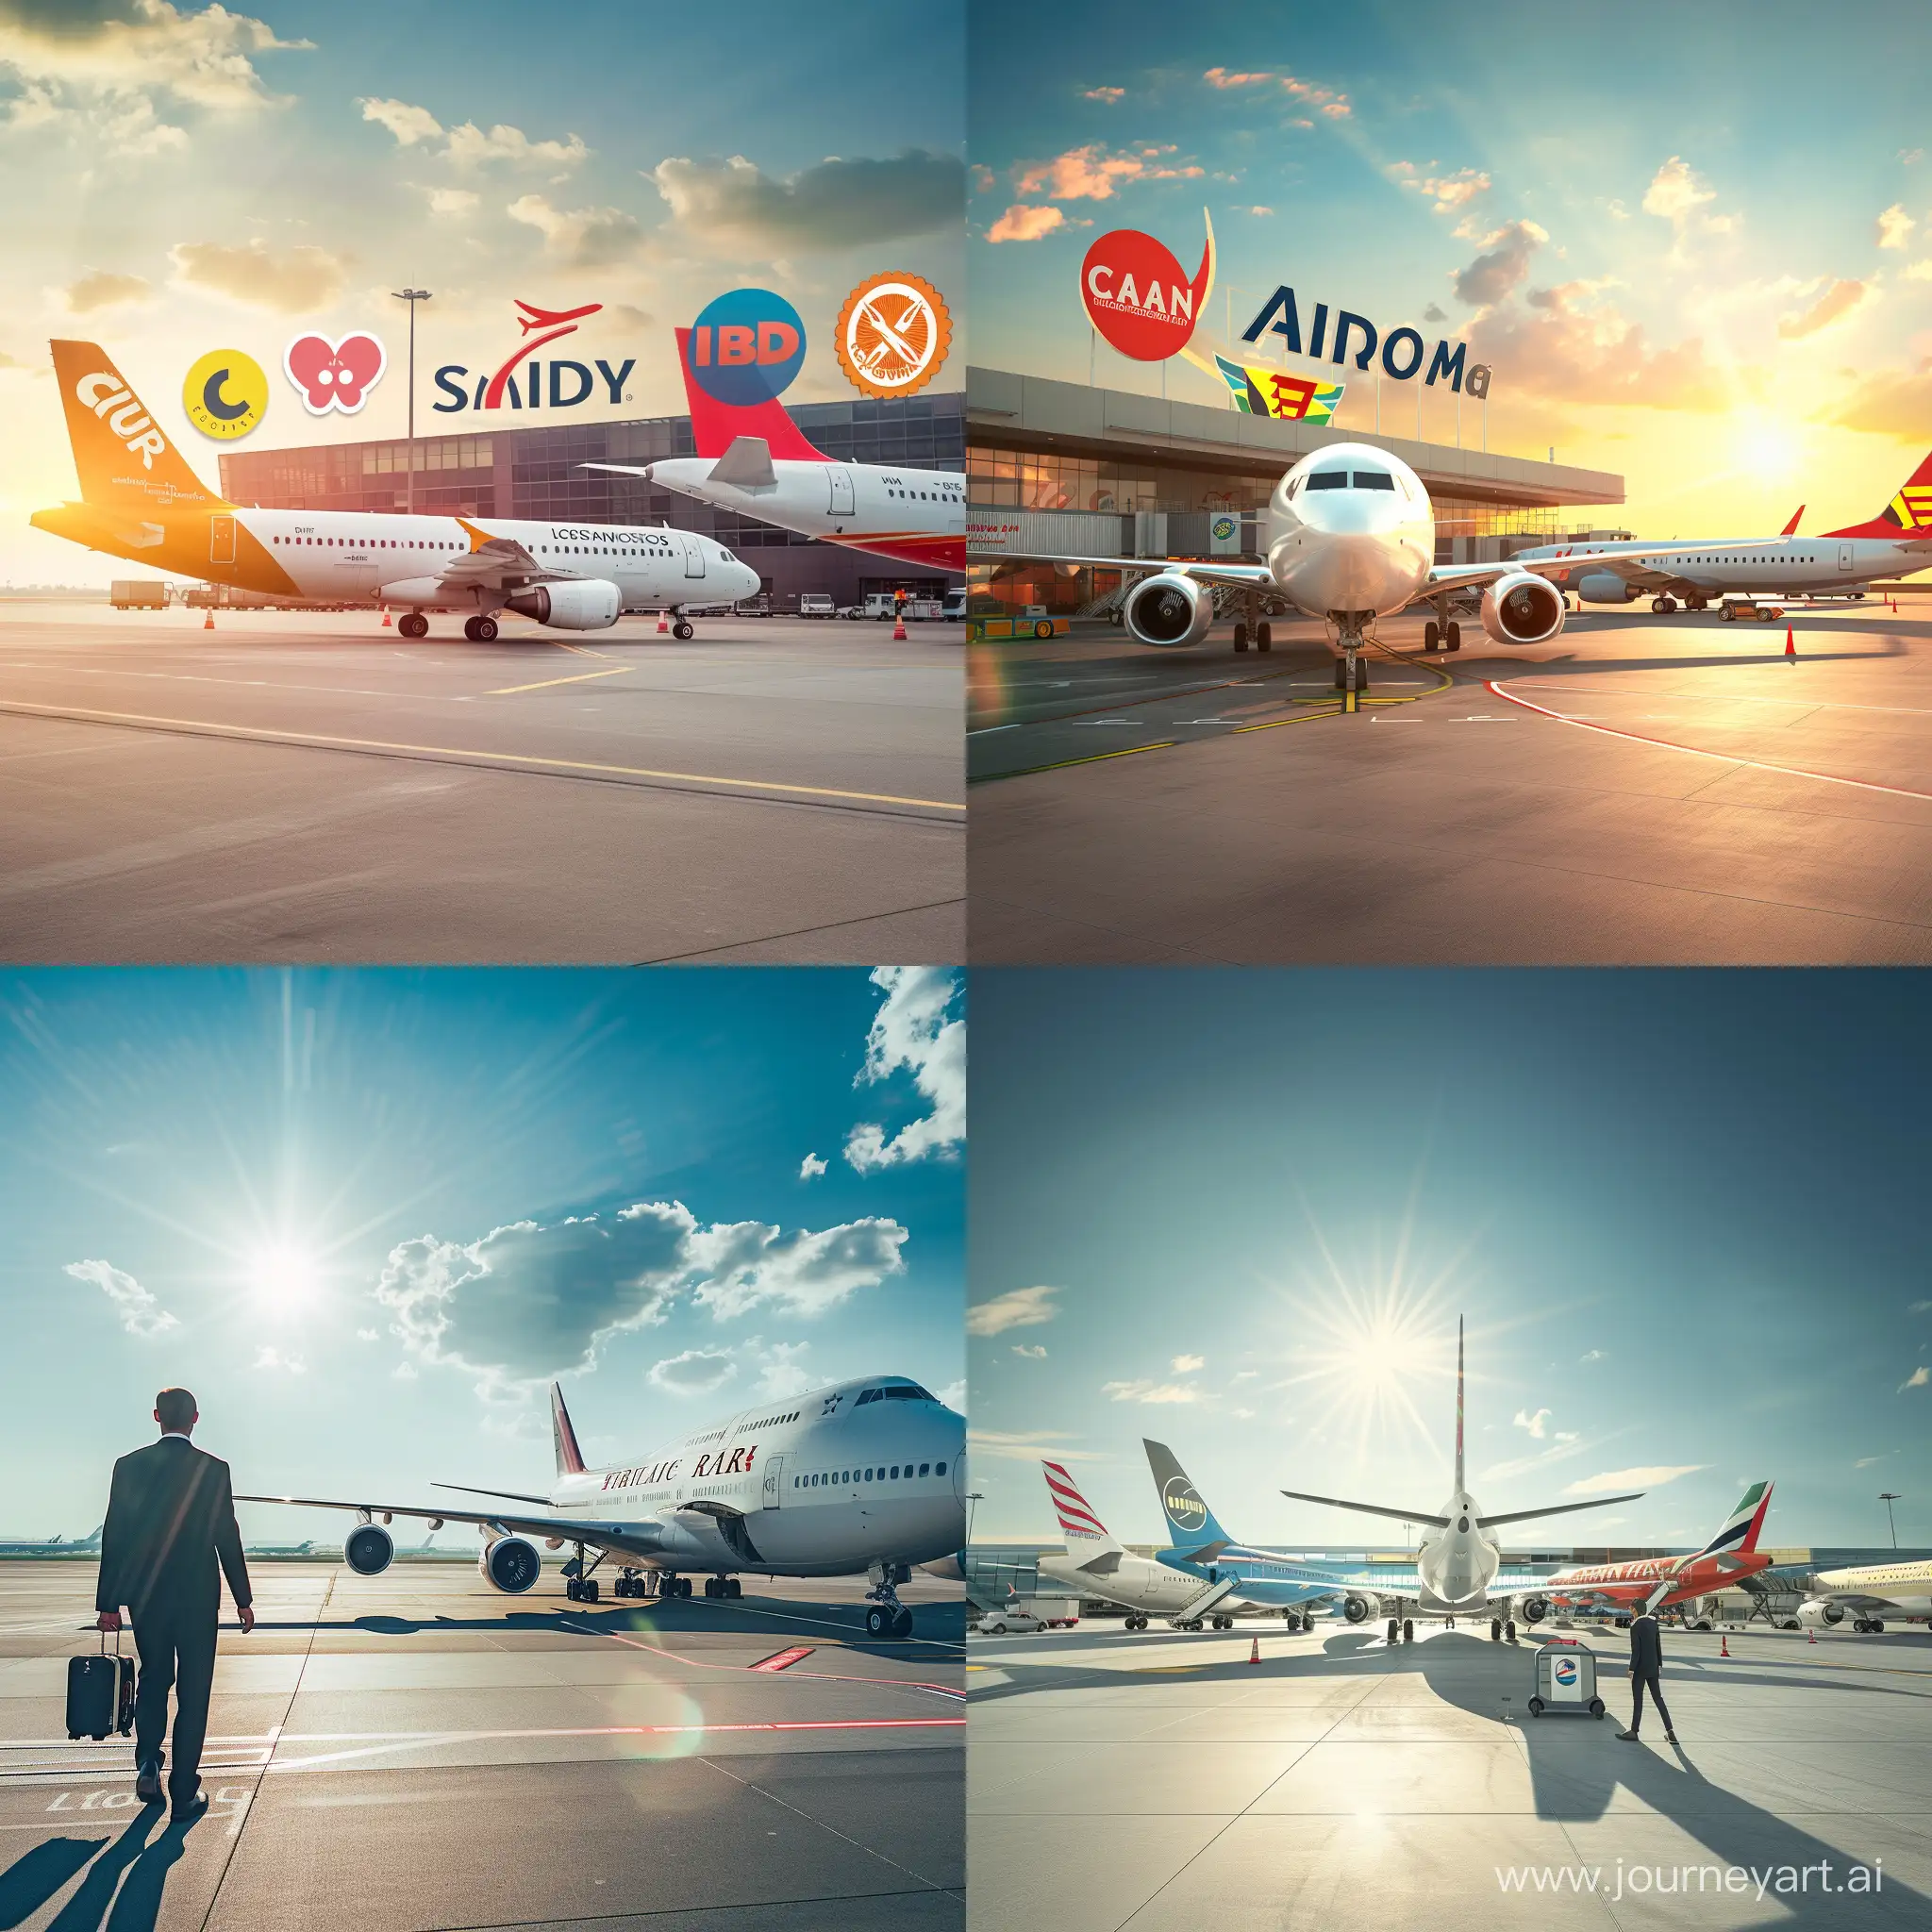 Airline company welcome agent at an airport servicing a client, bright, sunny, airplanes, logos